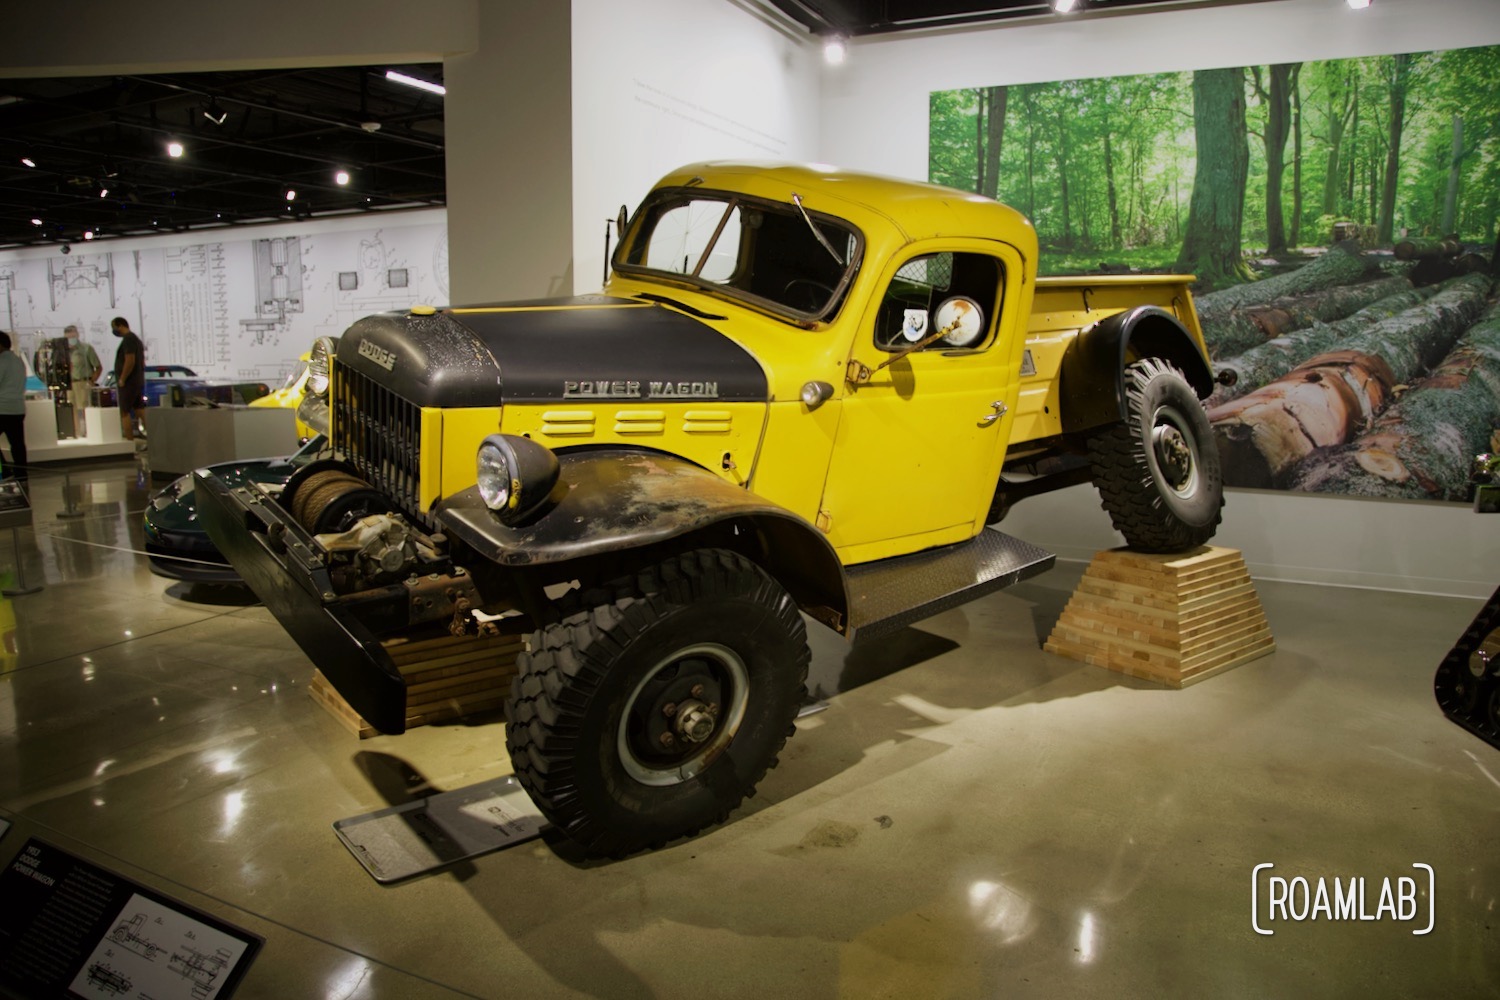 1953 Dodge Power Wagon on display at the Petersen Automotive Museum